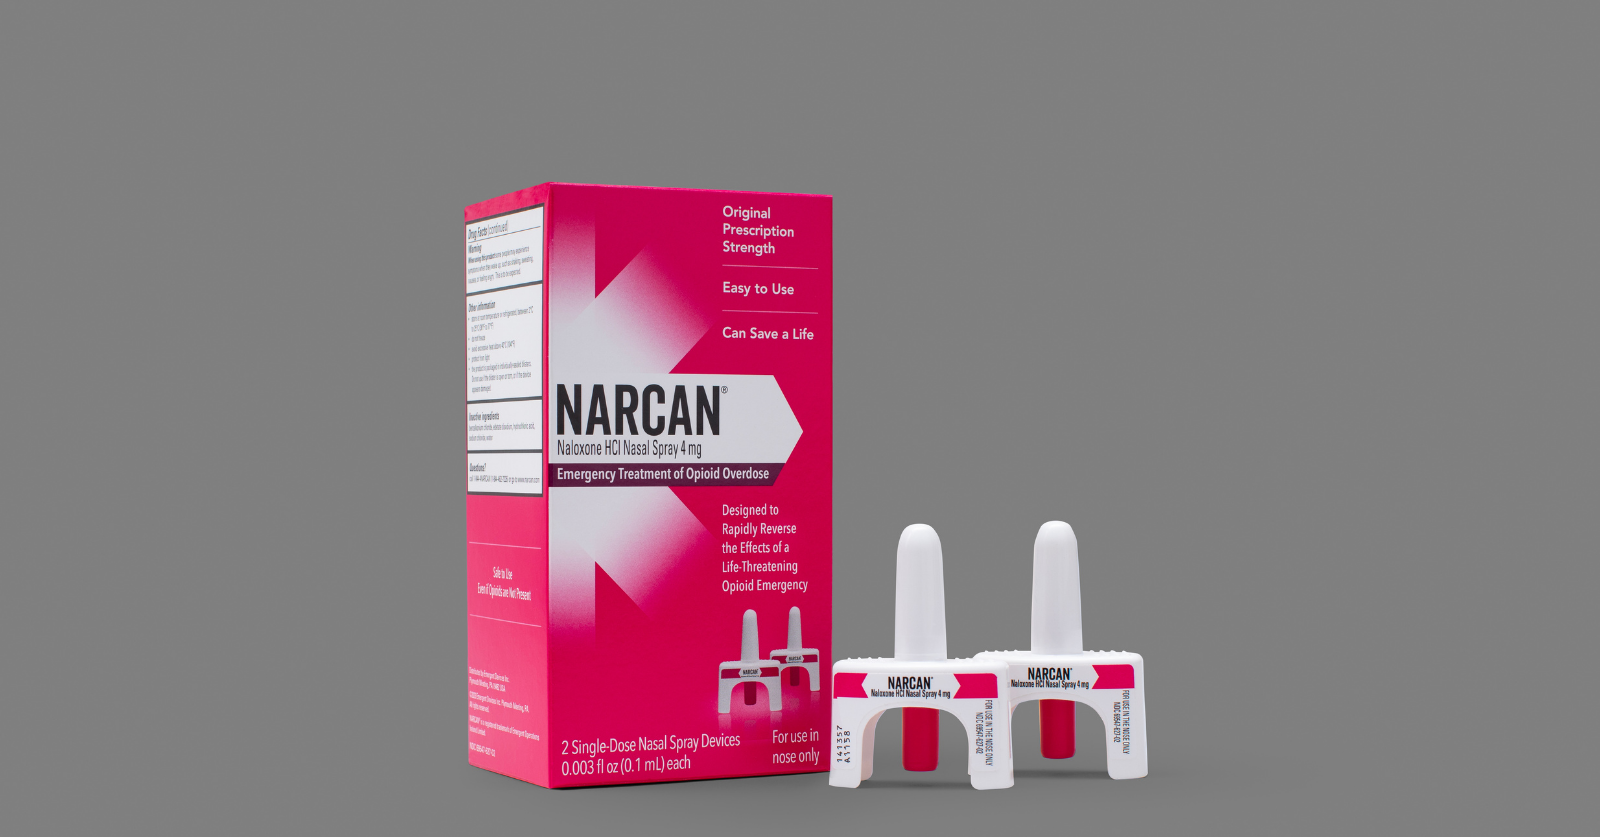 First over-the-counter Narcan shipped to stores